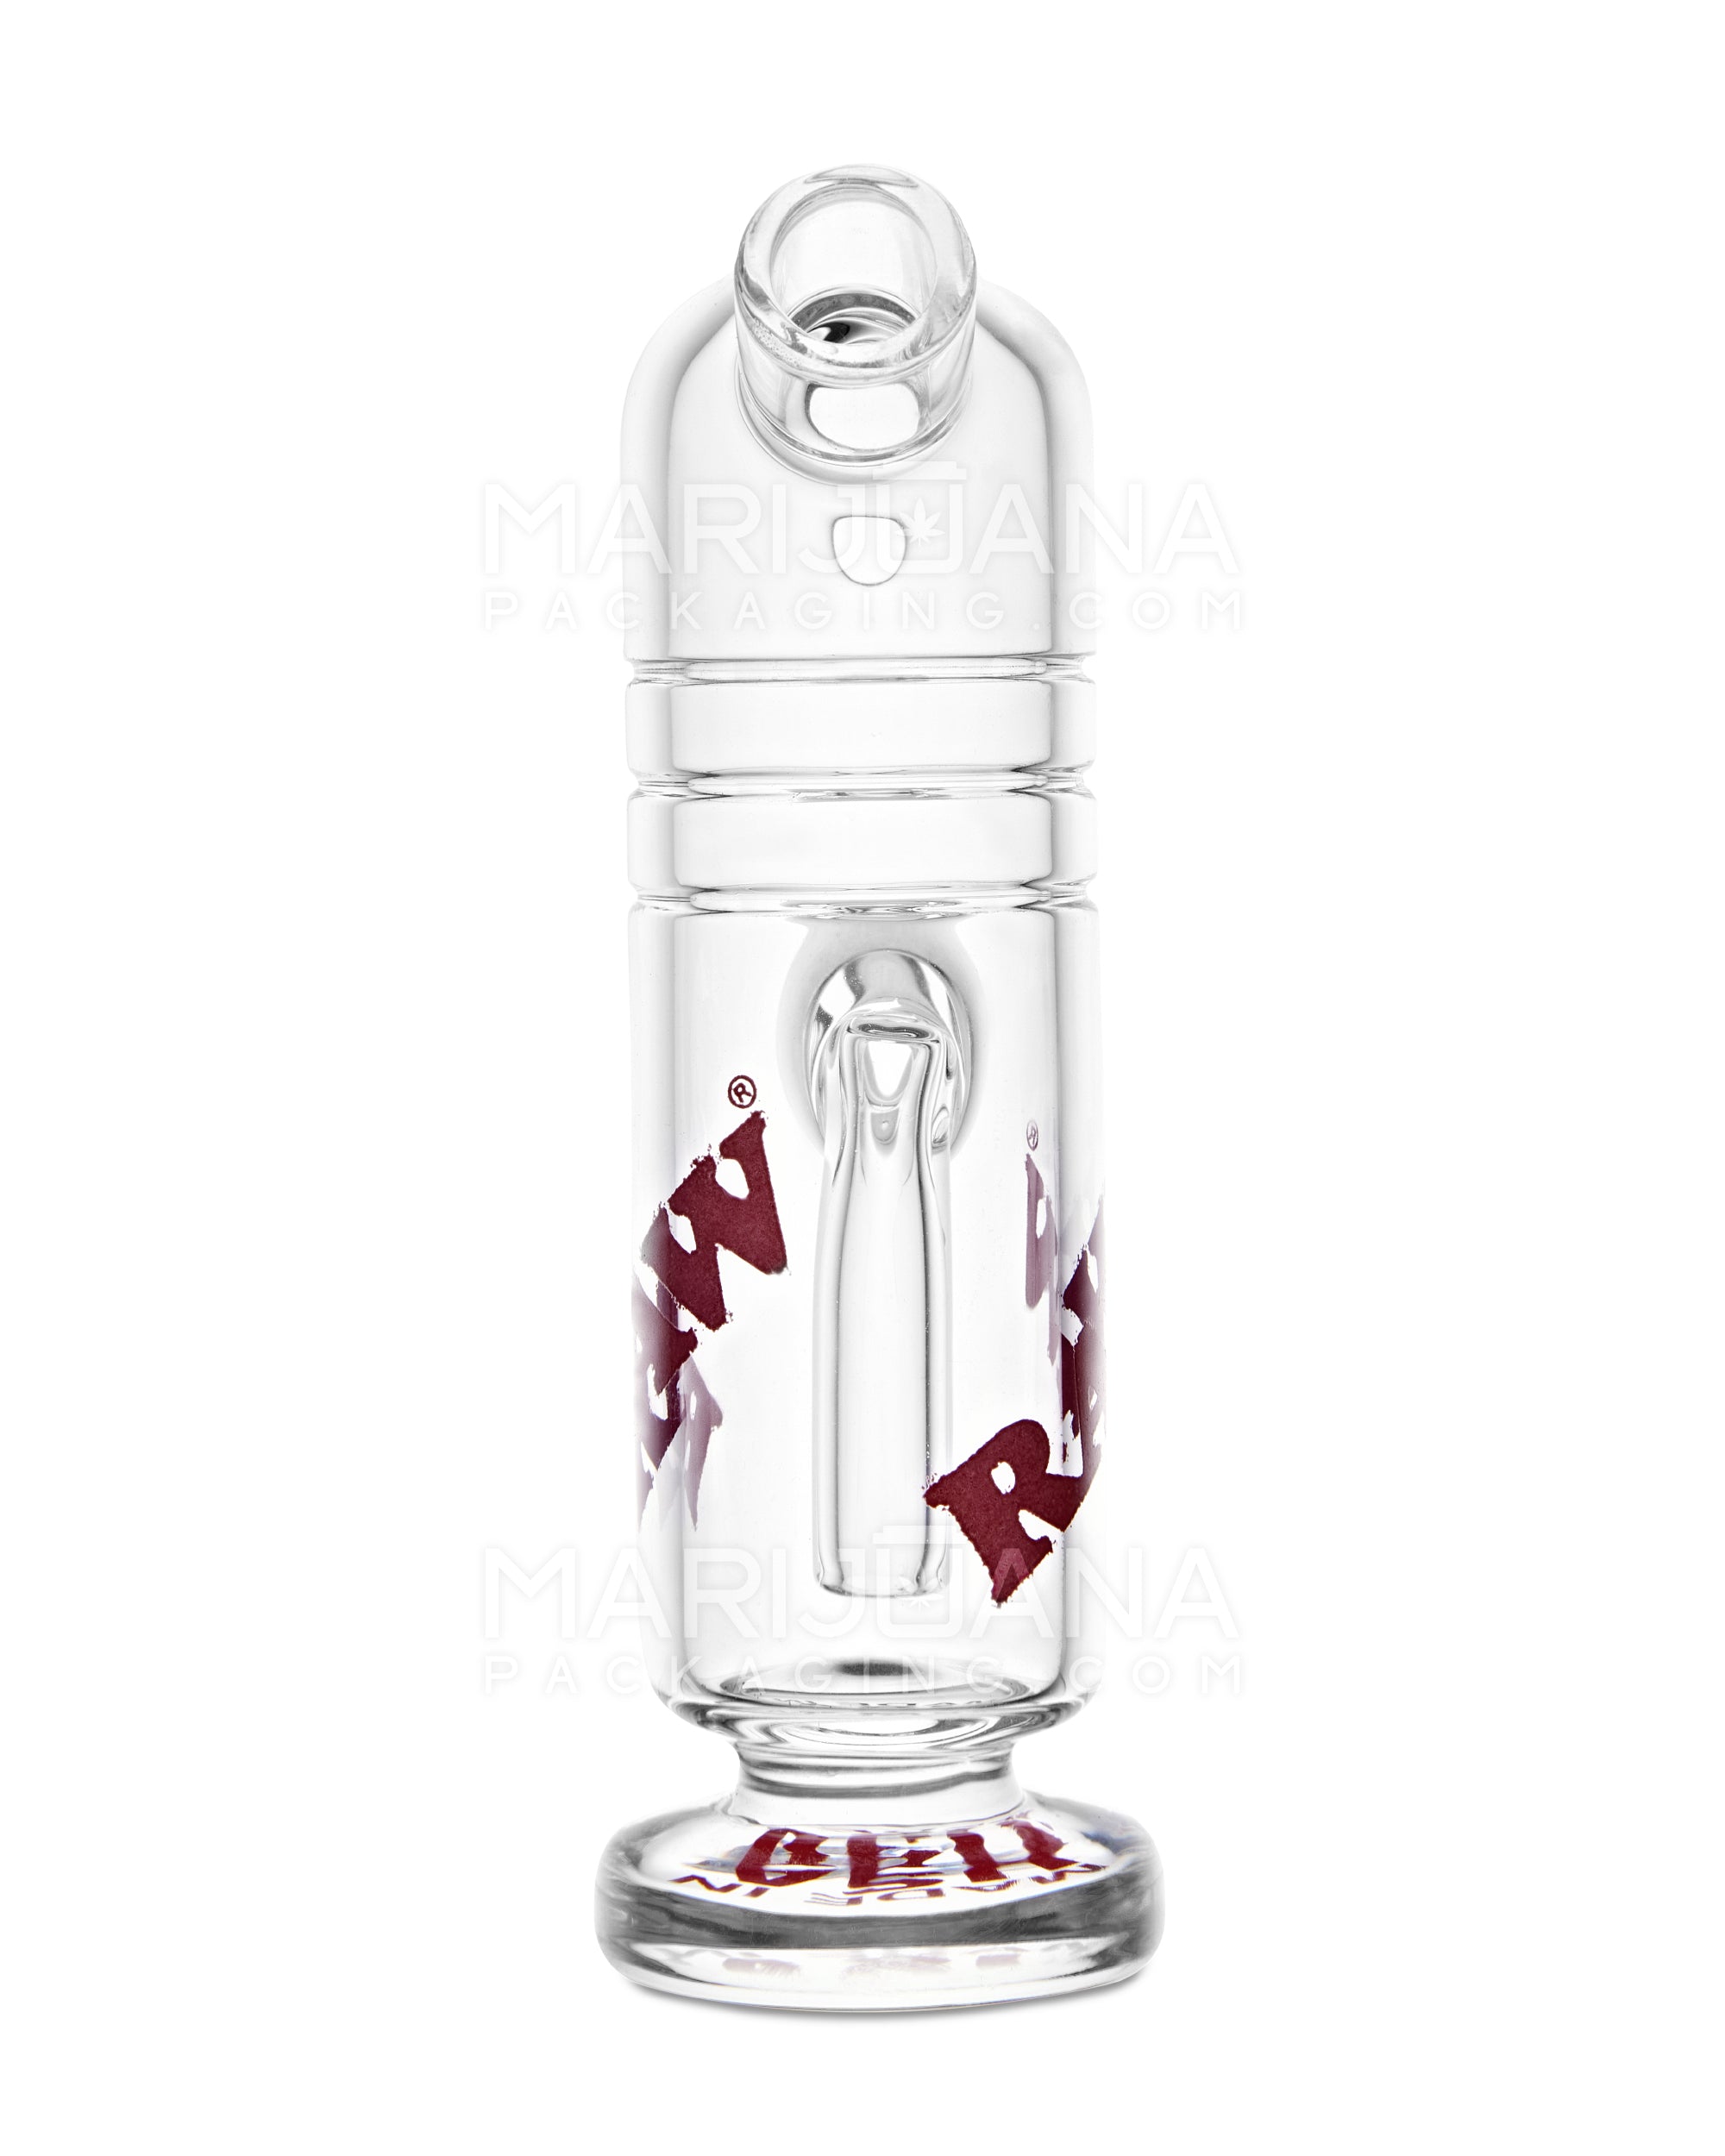 RAW | Compact Decal Glass Cone Bubbler | 2.25in Long - Glass - Clear